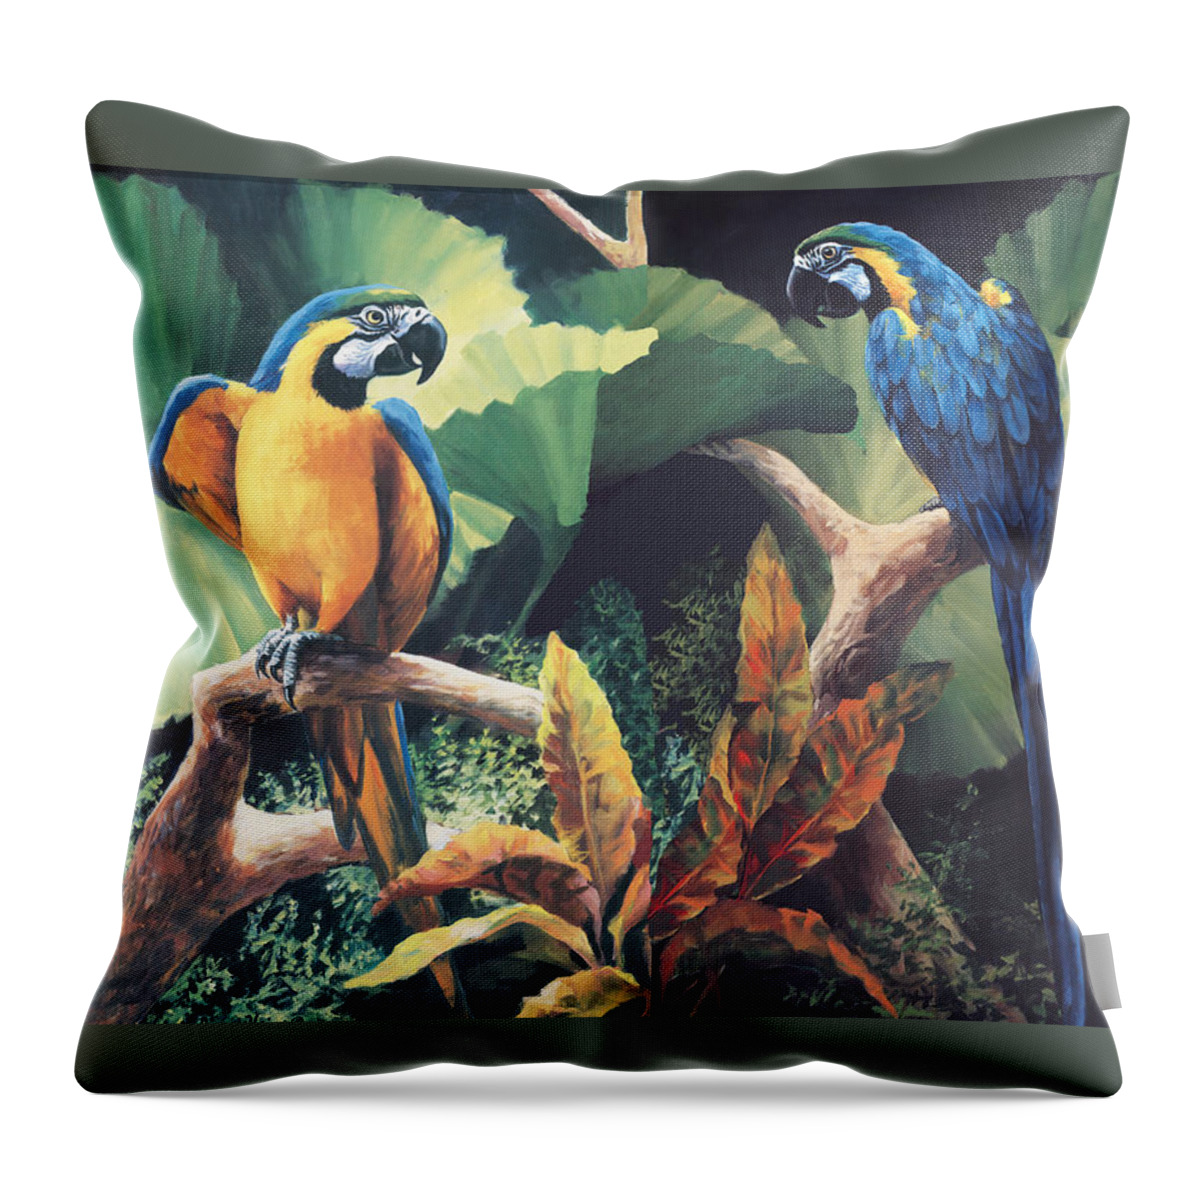 Macaw Throw Pillow featuring the painting Gossips by Laurie Snow Hein